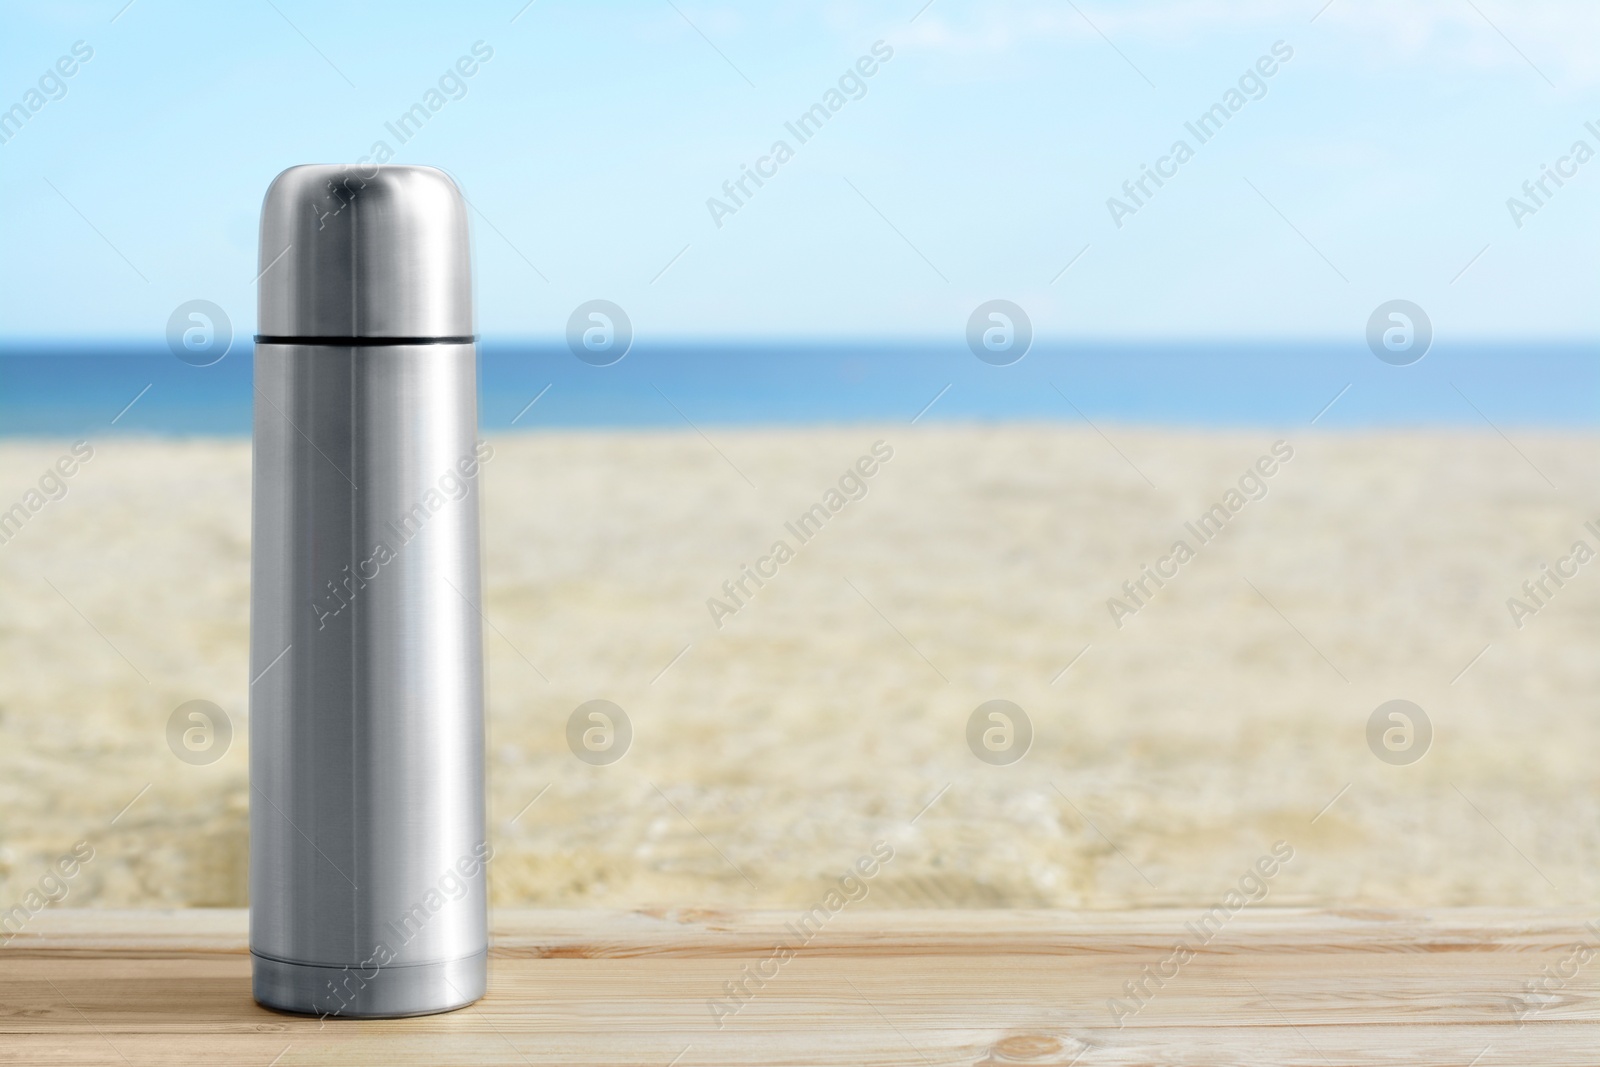 Photo of Metallic thermos with hot drink on wooden surface near sea, space for text